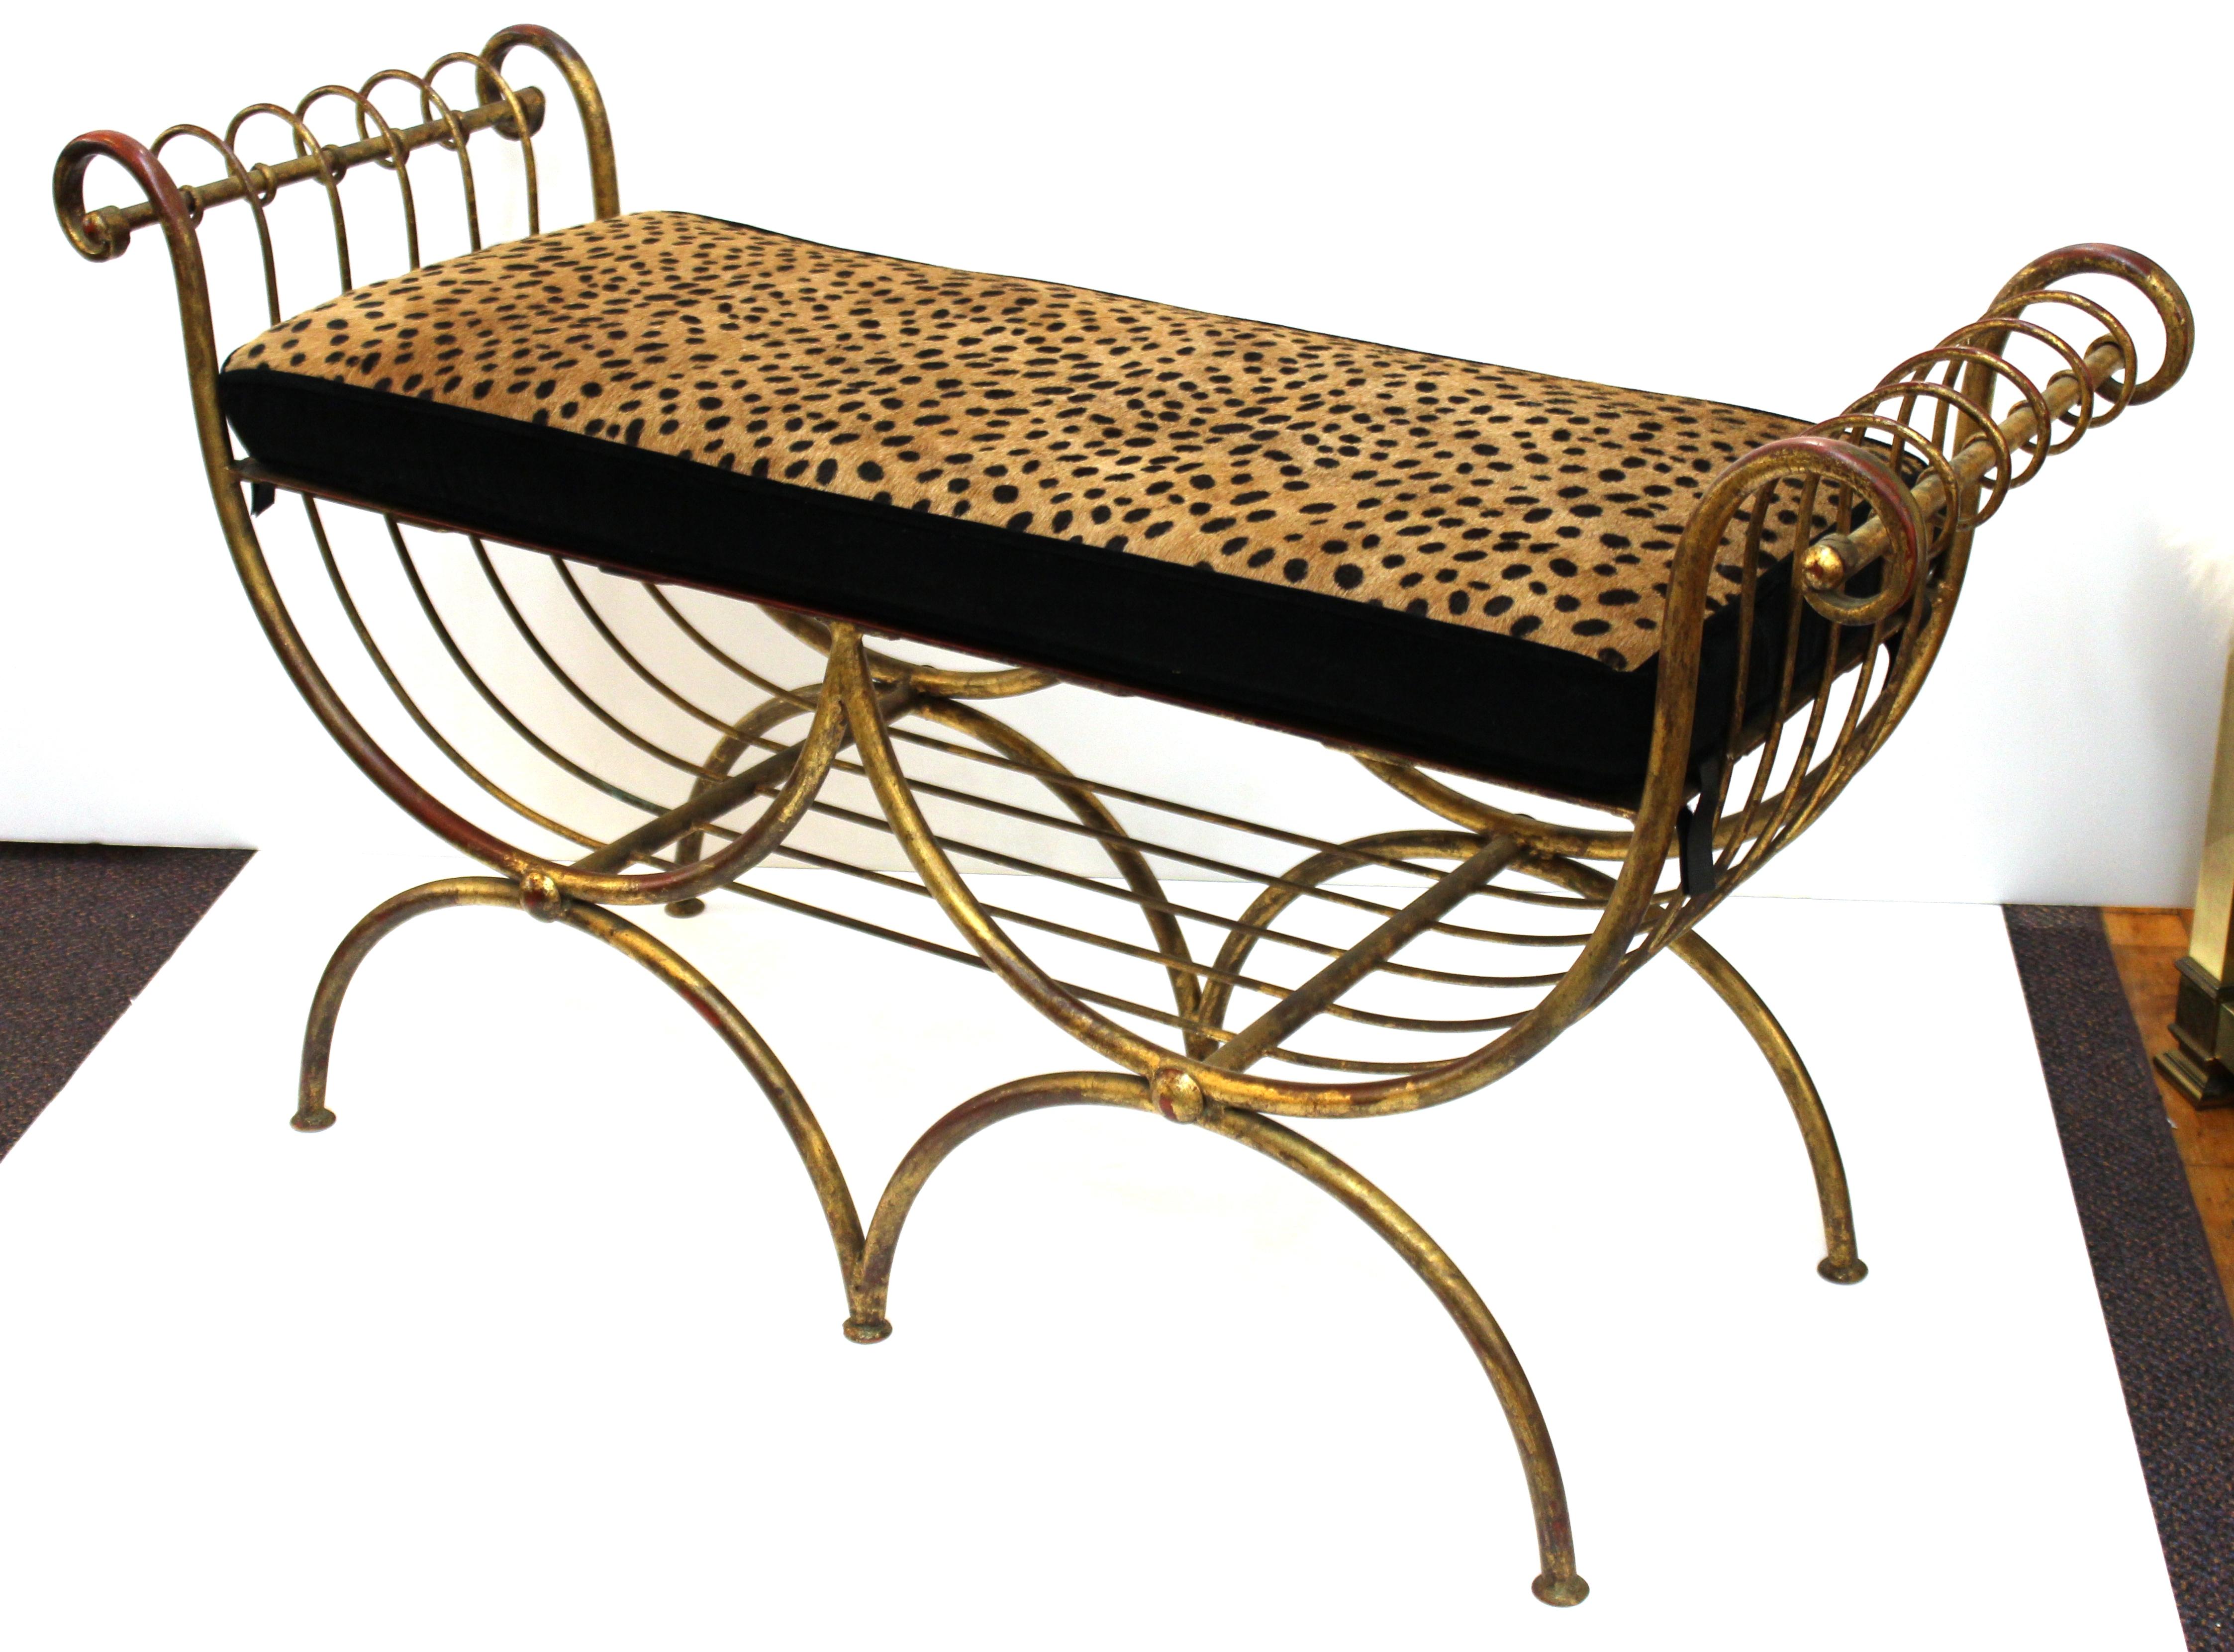 Mid-20th Century Italian Mid-Century Modern Bench in Gilt Iron with Faux Leopard Leather Seat